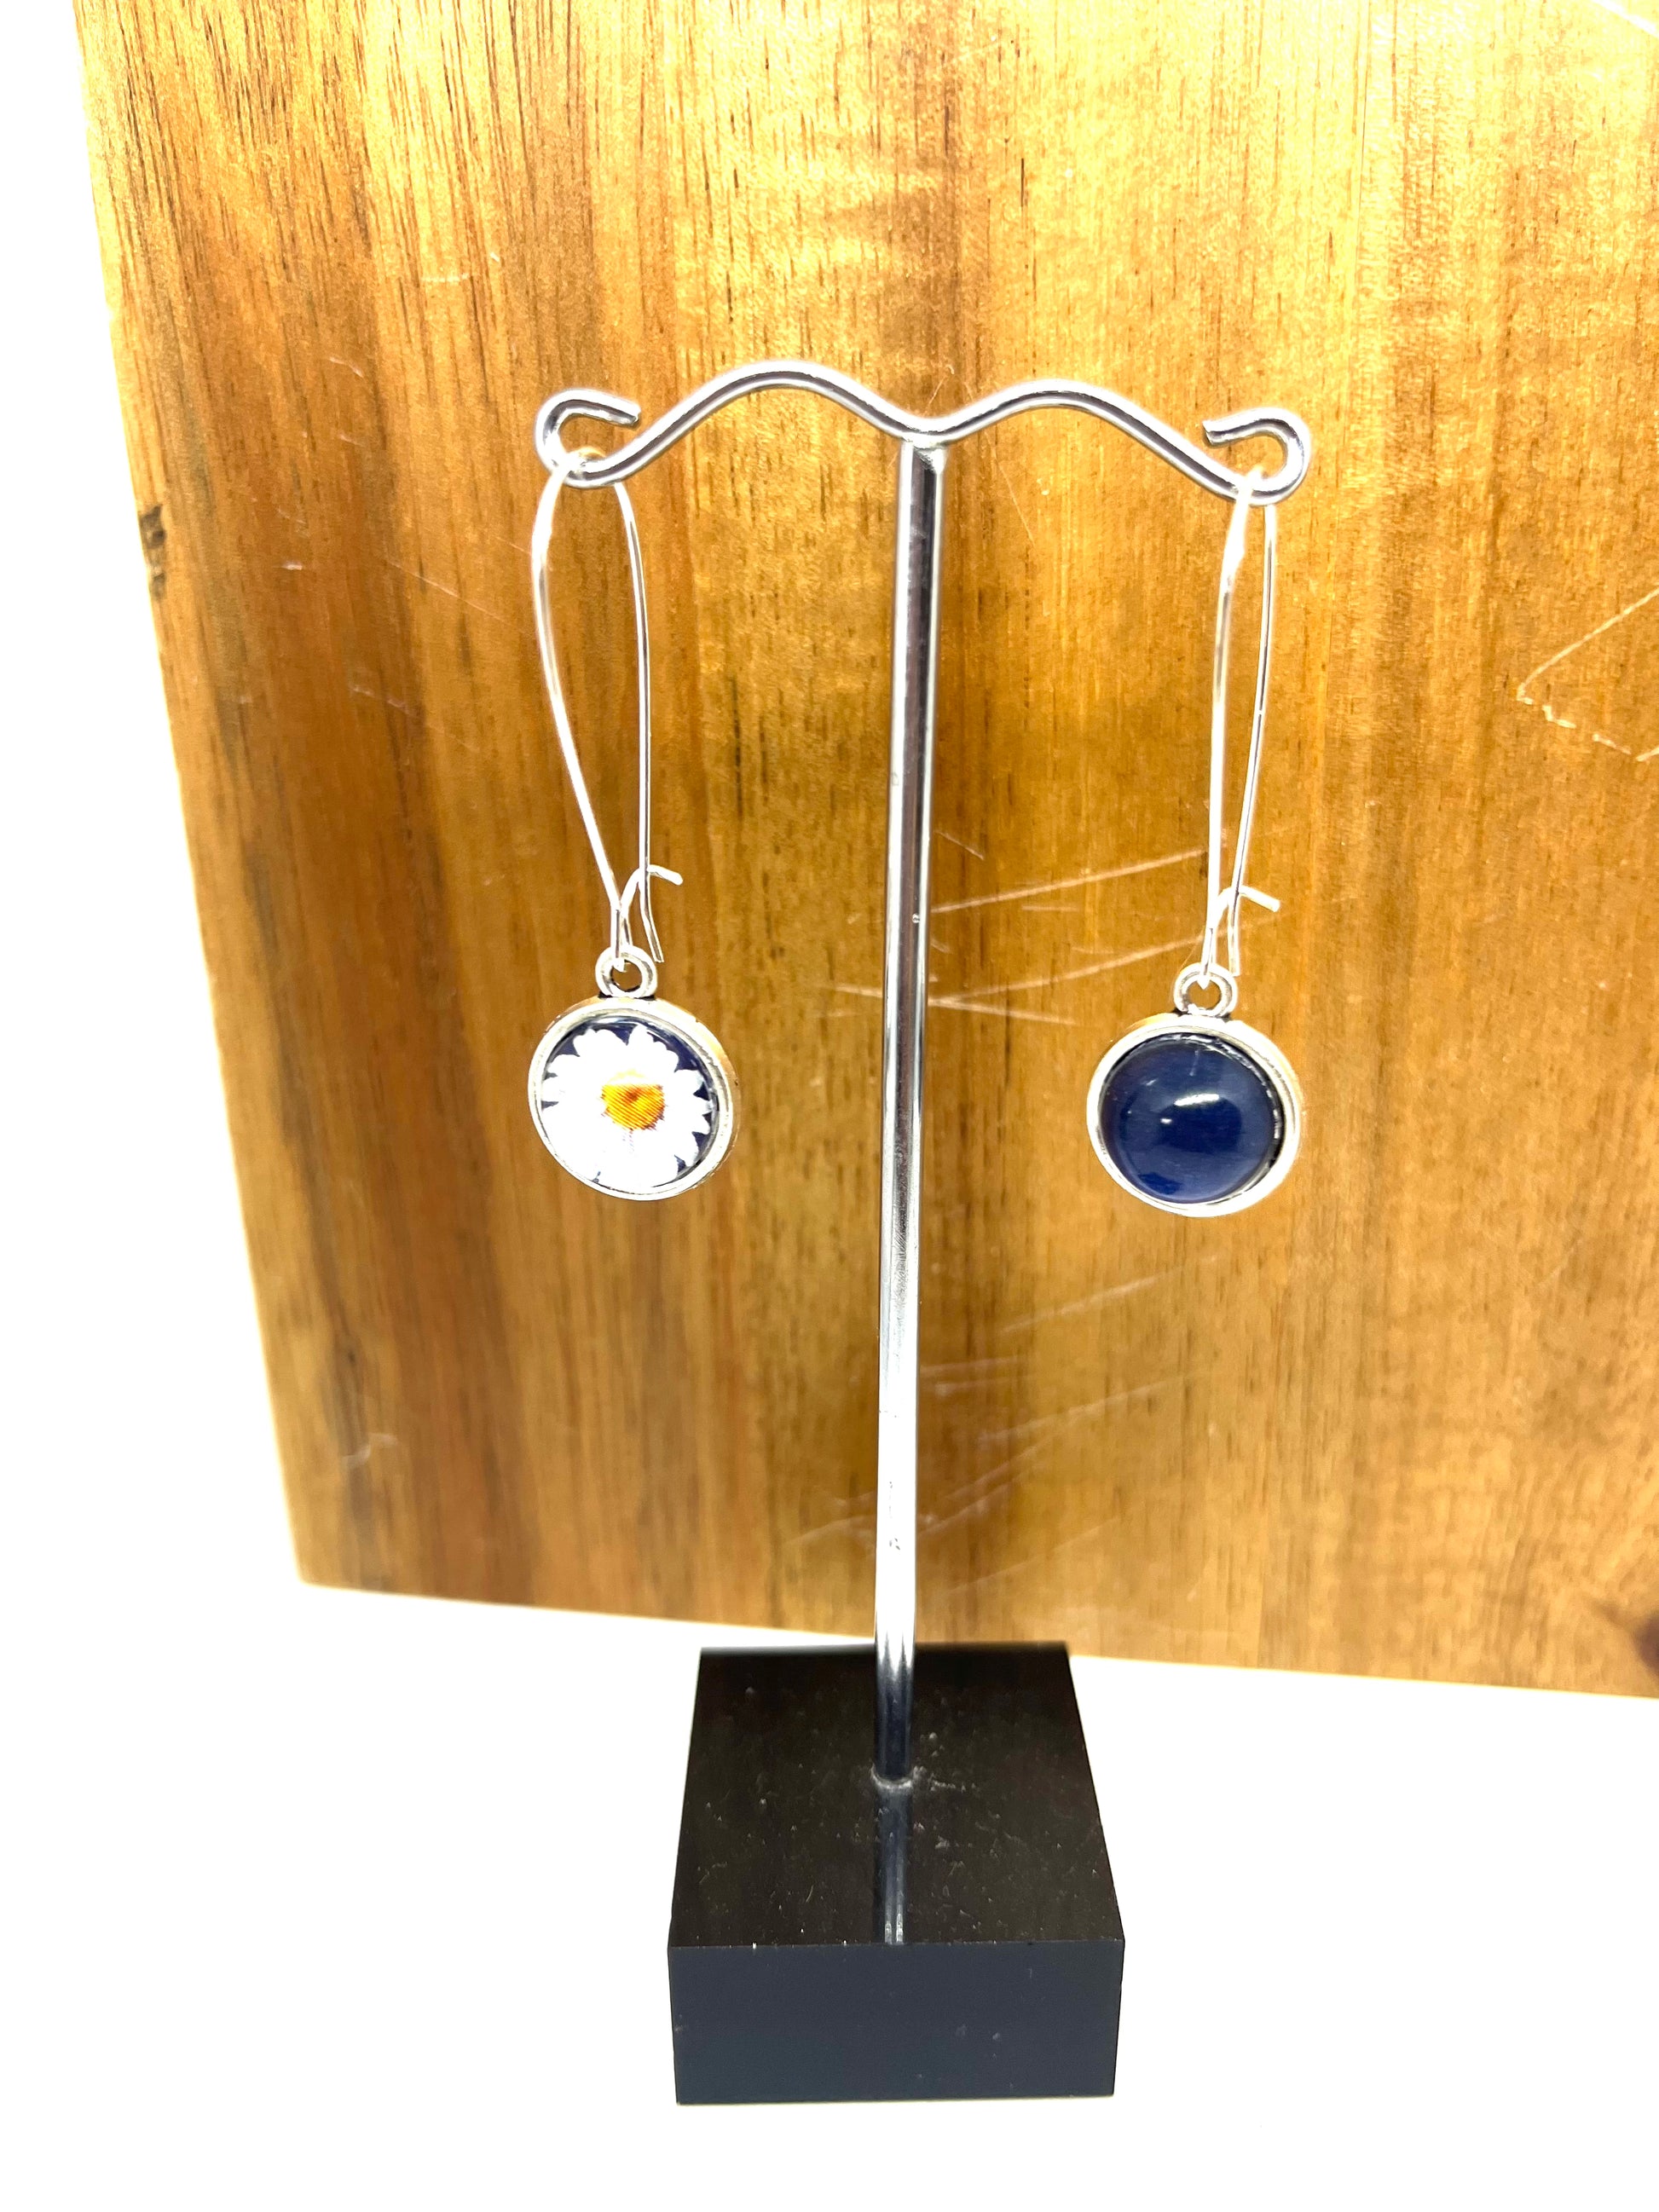 Double sided glass dome earrings with navy on one side and a white daisy with navy background on the othe